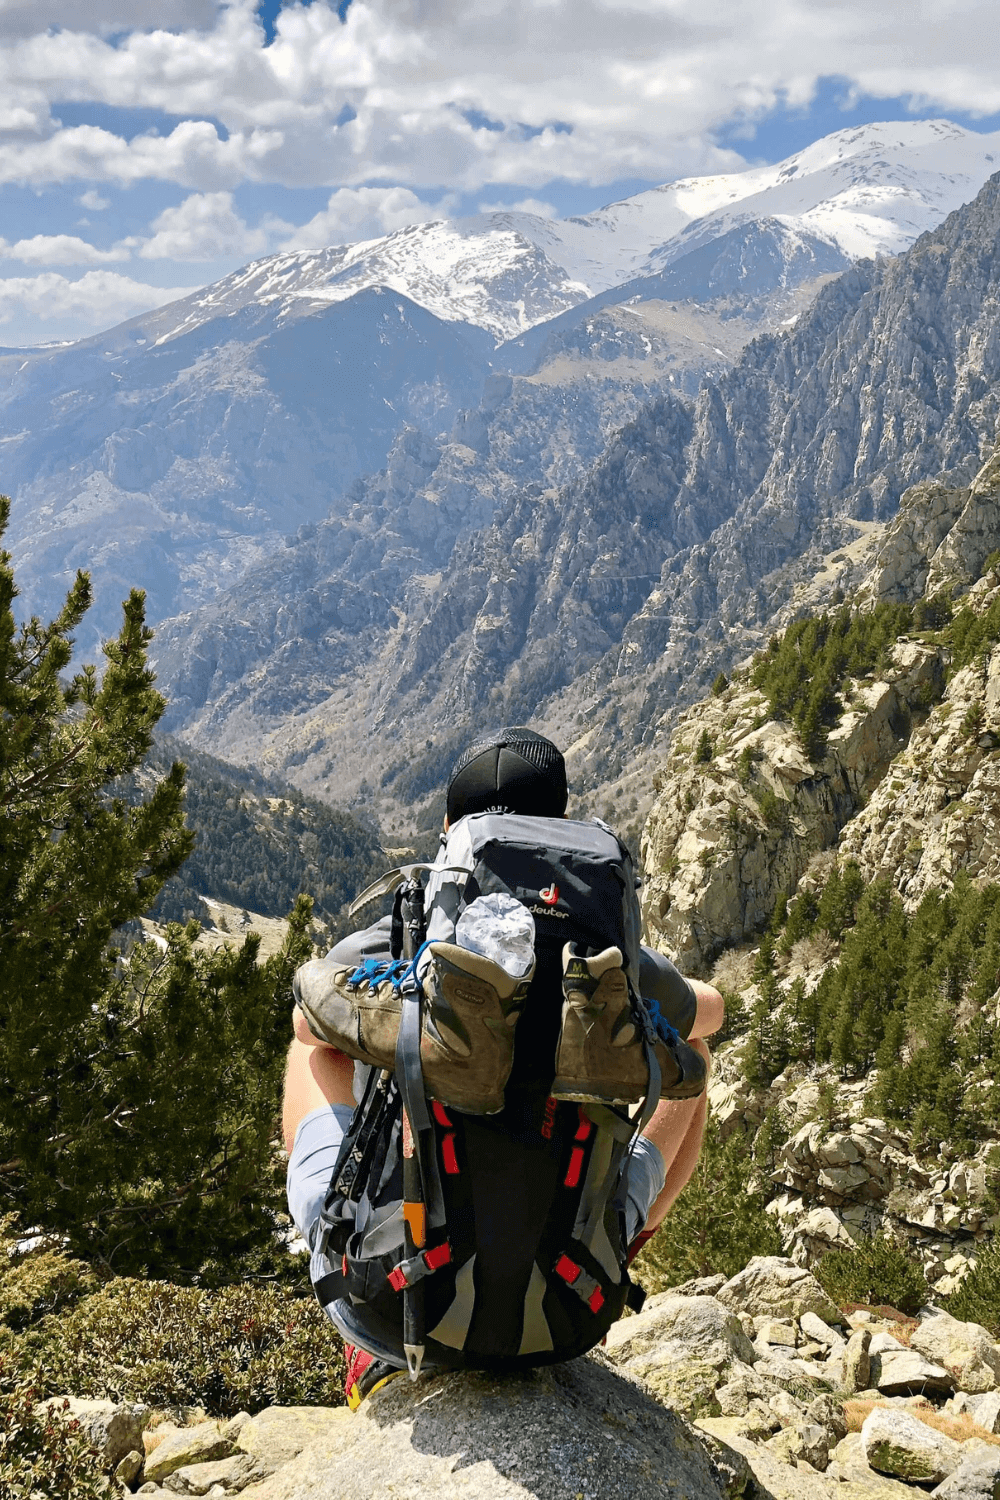 Hiker taking a break and enjoying the scenic view of a majestic canyon, highlighting the beauty of nature and outdoor adventure.